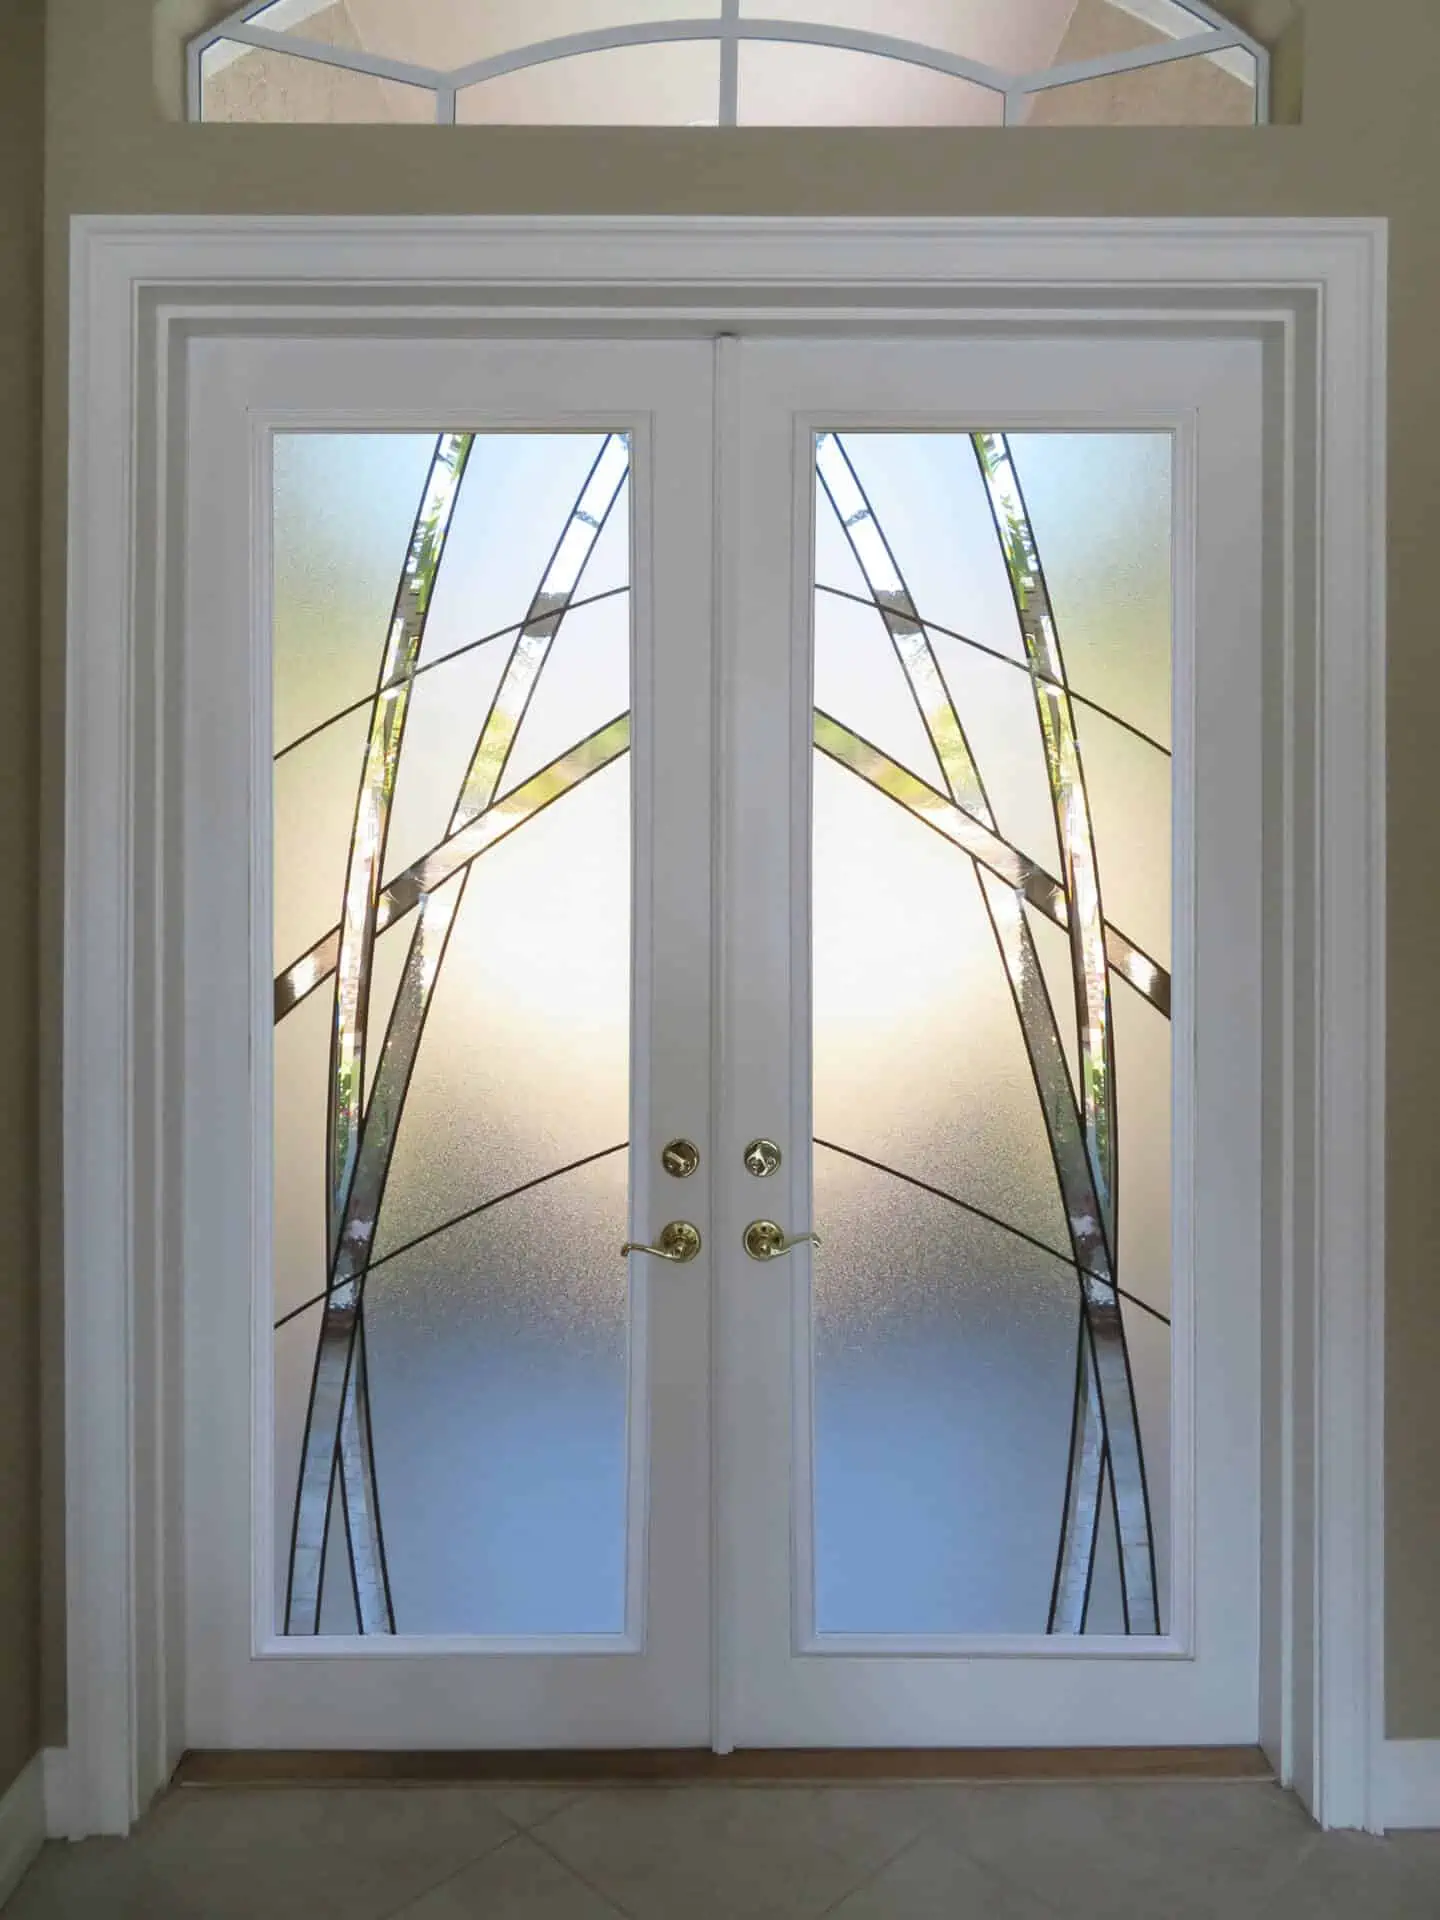 Can I Add Glass to My Existing Door? - Glass Design